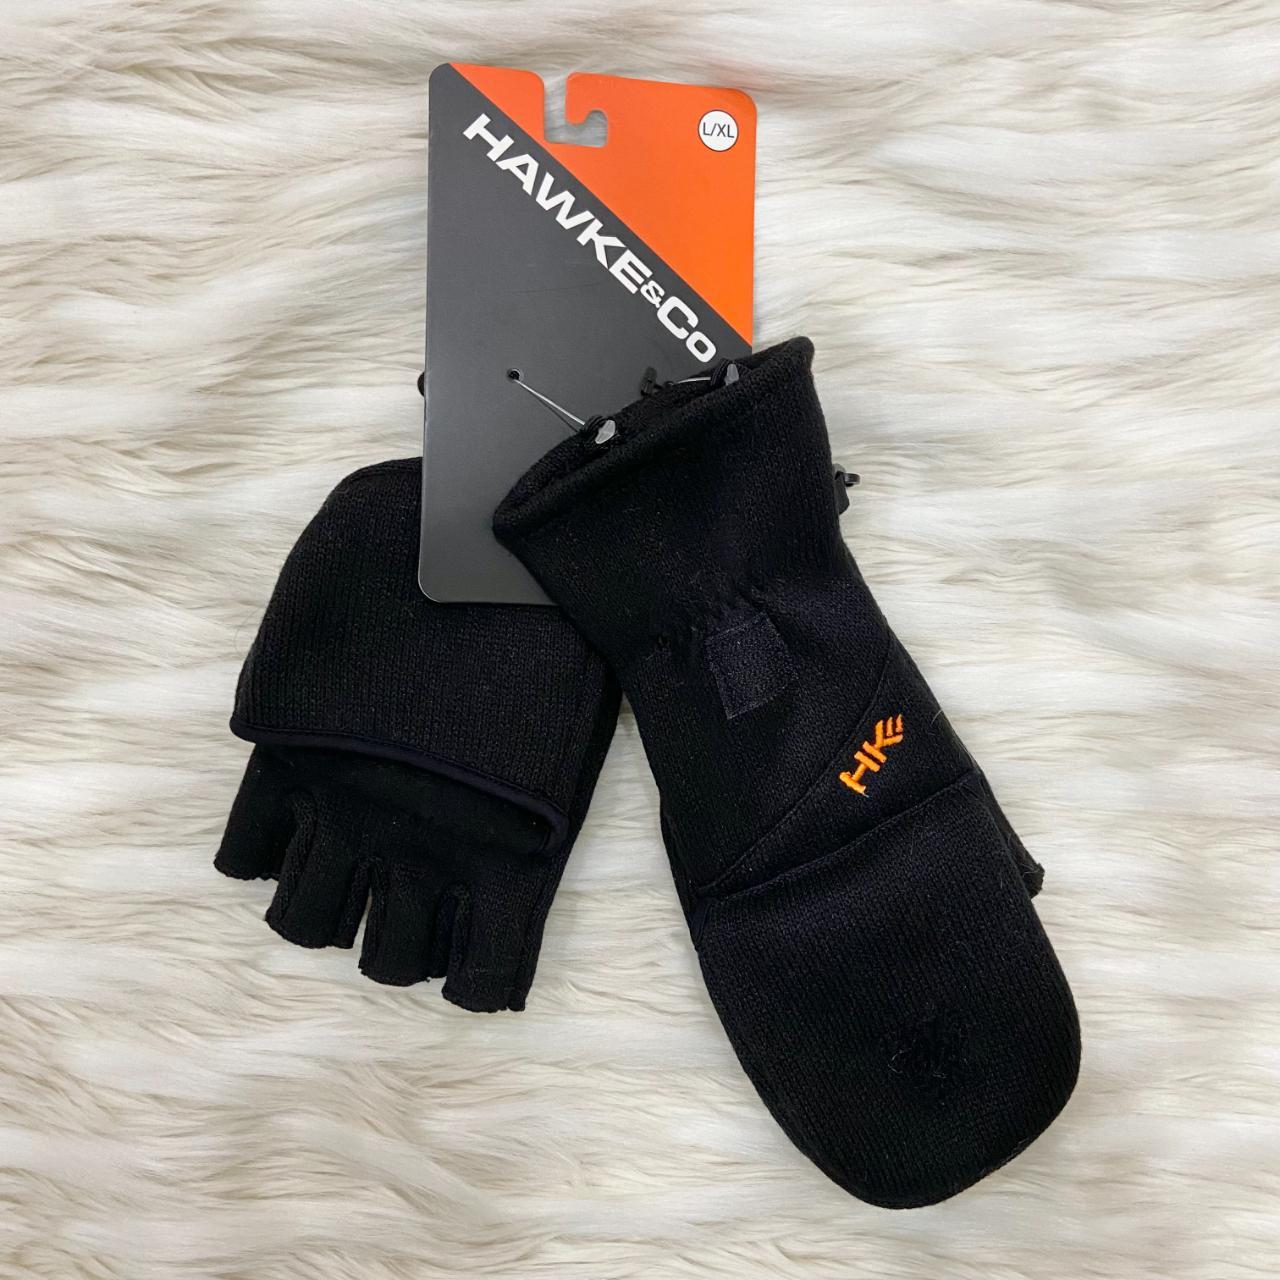 Product Image 1 - WARM WINTER GLOVES

These Hawke &